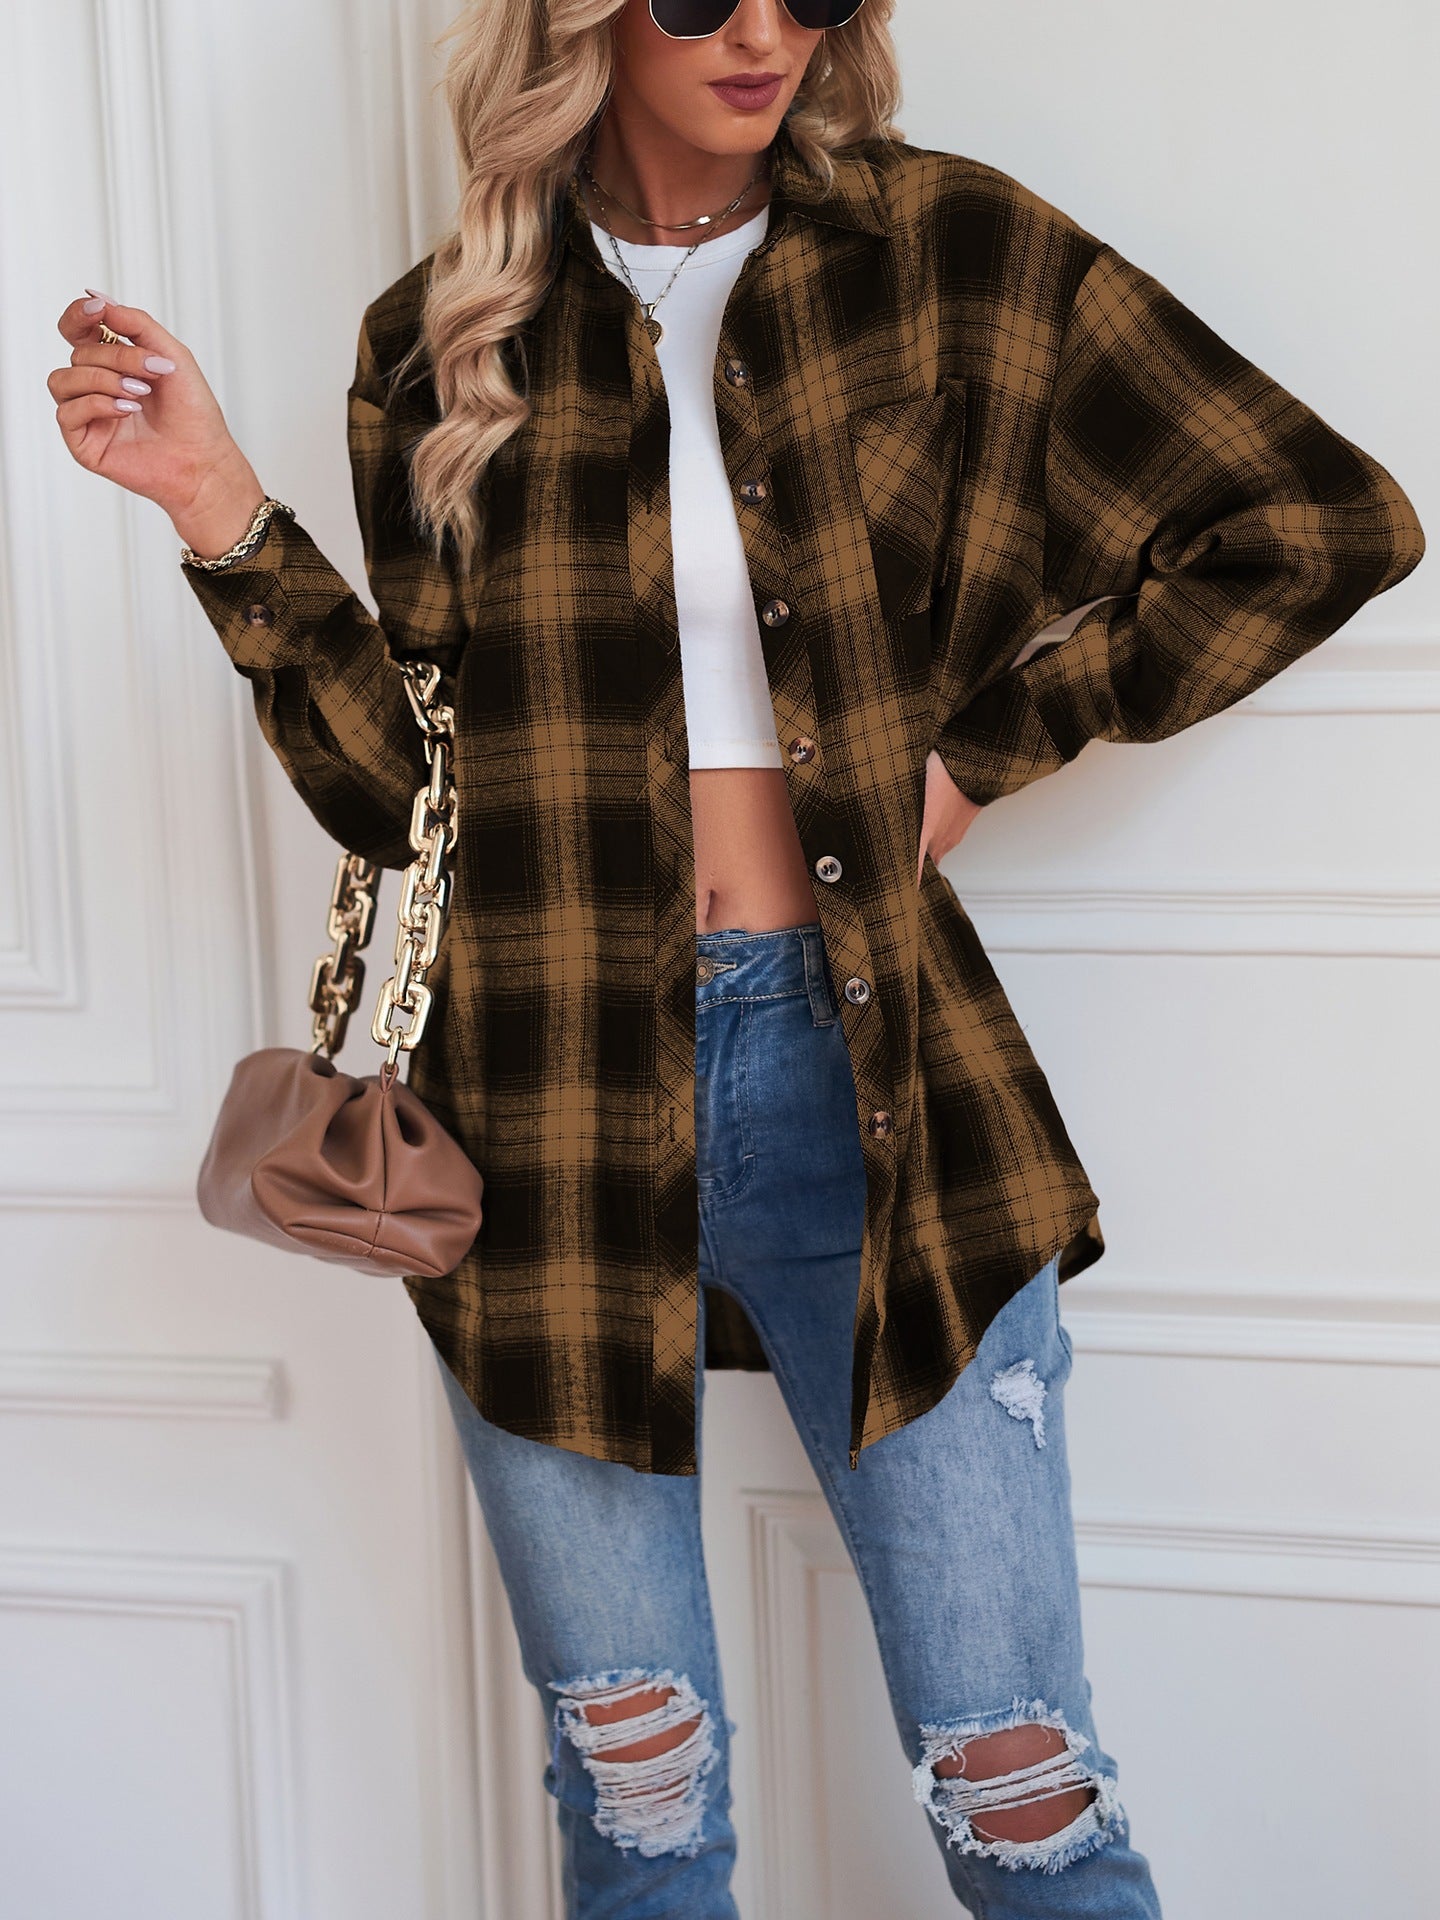 Women's New Cross border European and American Foreign Trade Casual Boyfriend Style Loose Plaid Shirt